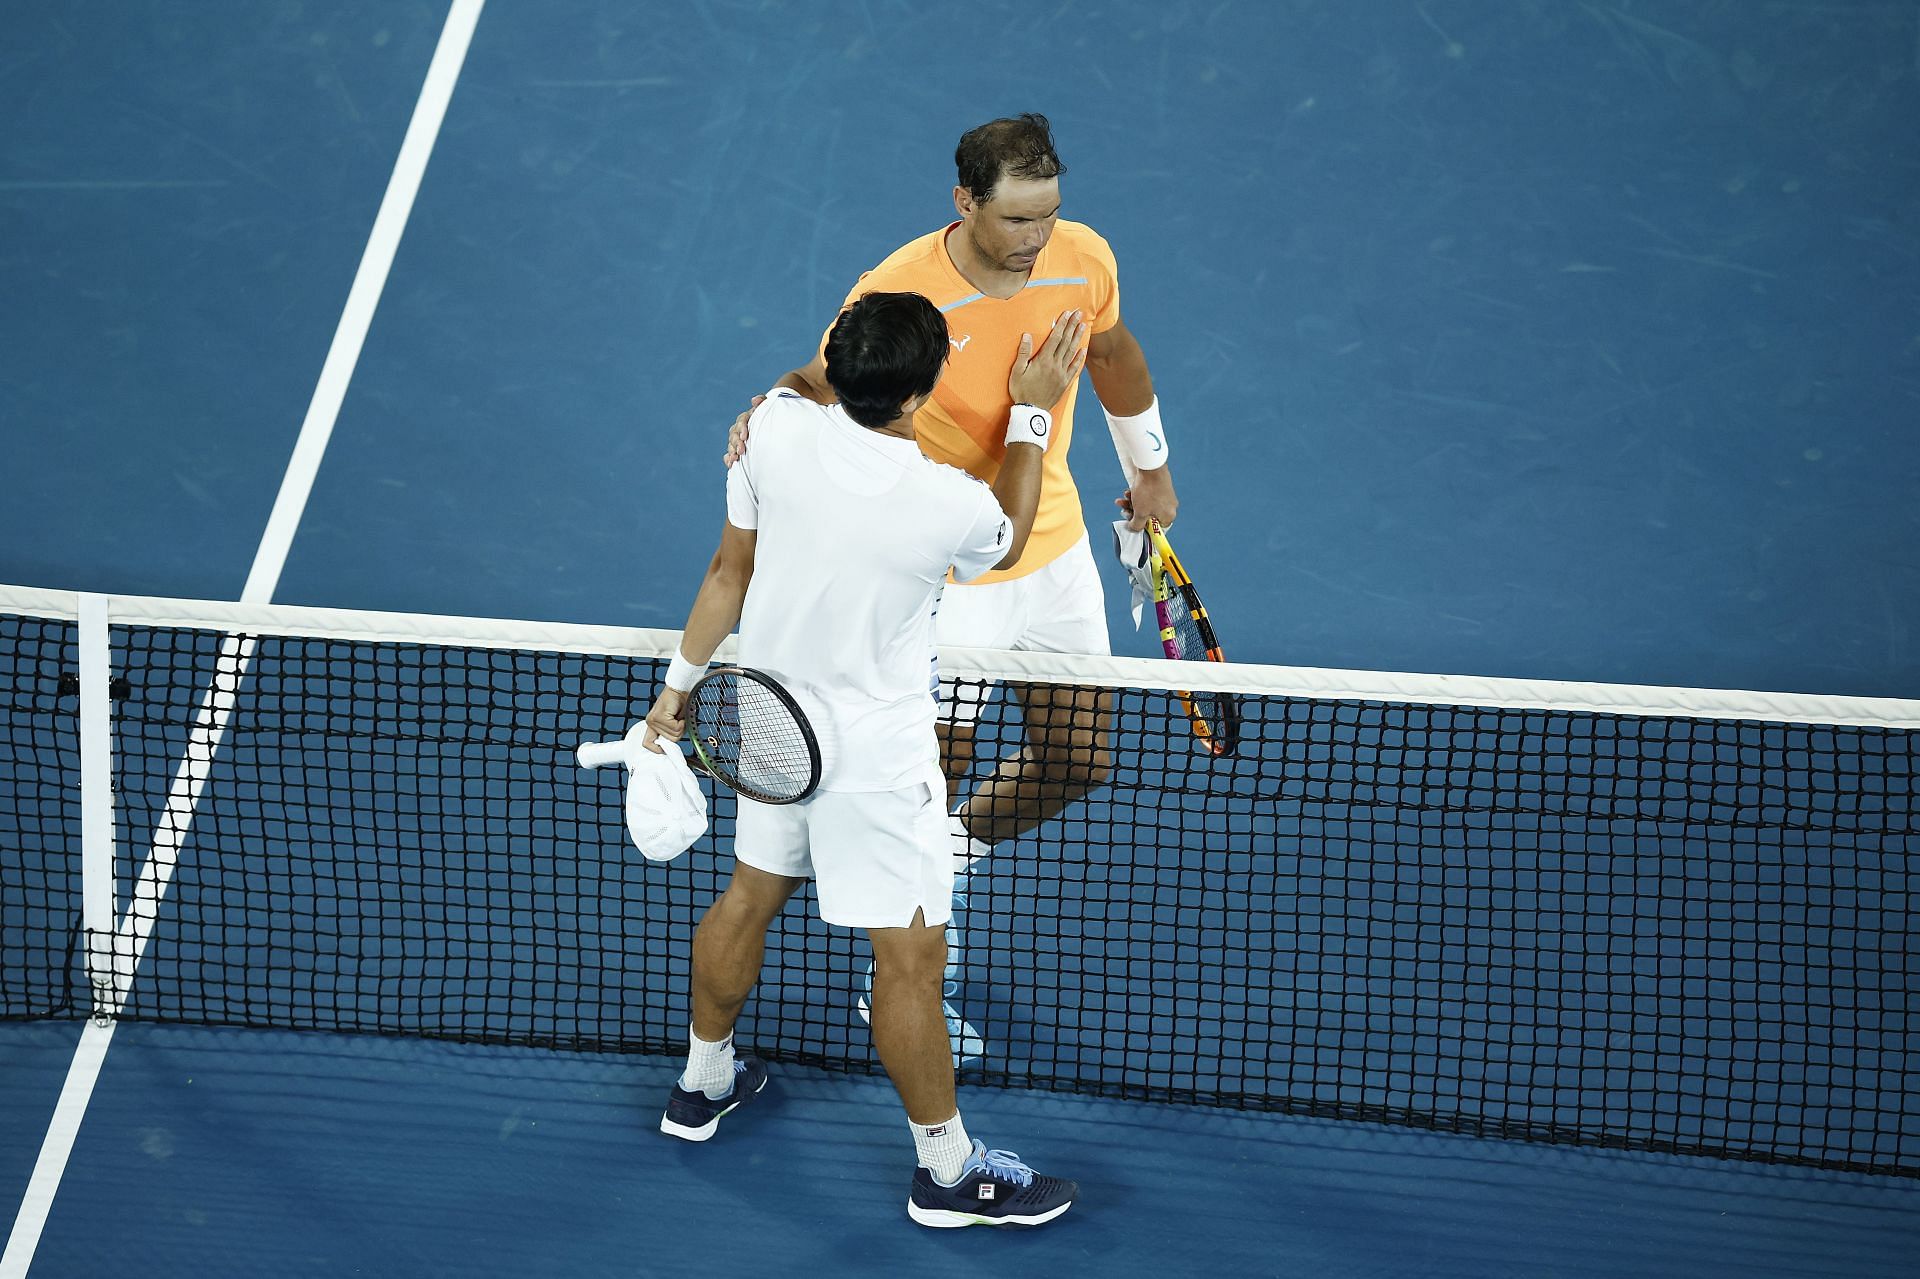 2023 Australian Open - Day 3 Rafael Nadal of Spain shakes hands with Mackenzie McDonald of the United States after losing their second-round singles match during the 2023 Australian Open